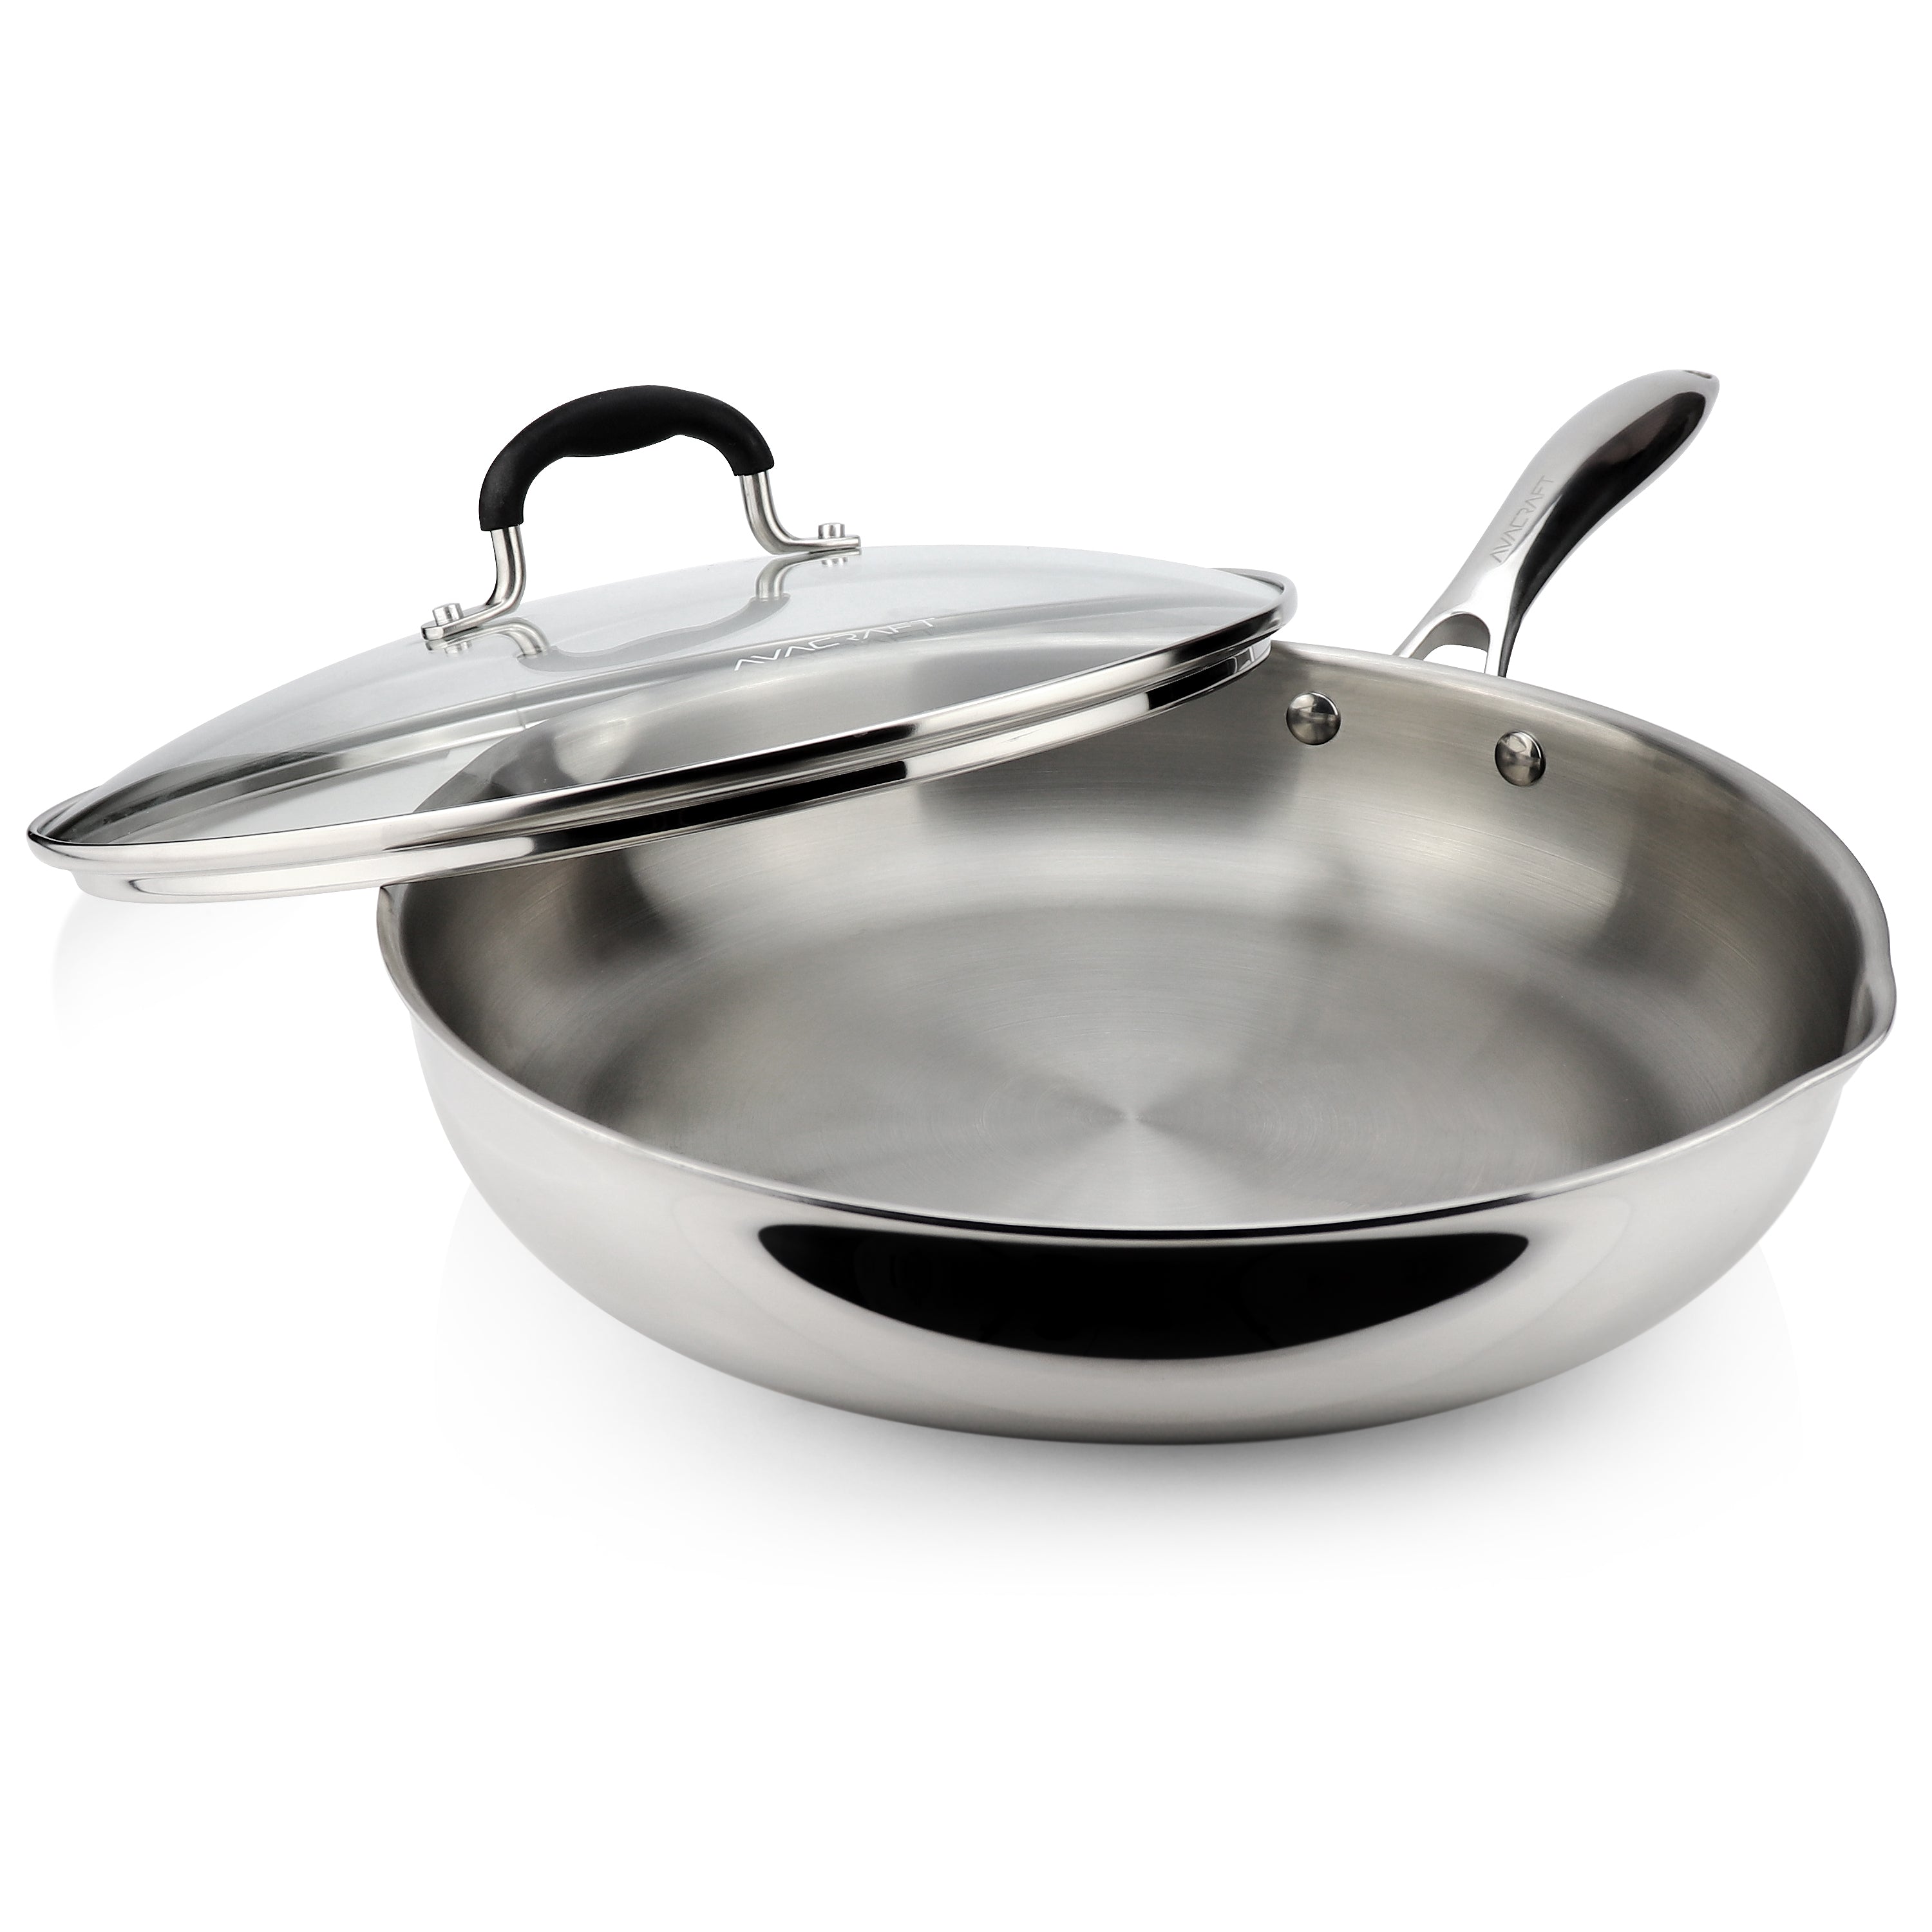 10 Inch Tri-Ply Stainless Steel Frying Pan with Lid, Side Spouts, Induction  Pan